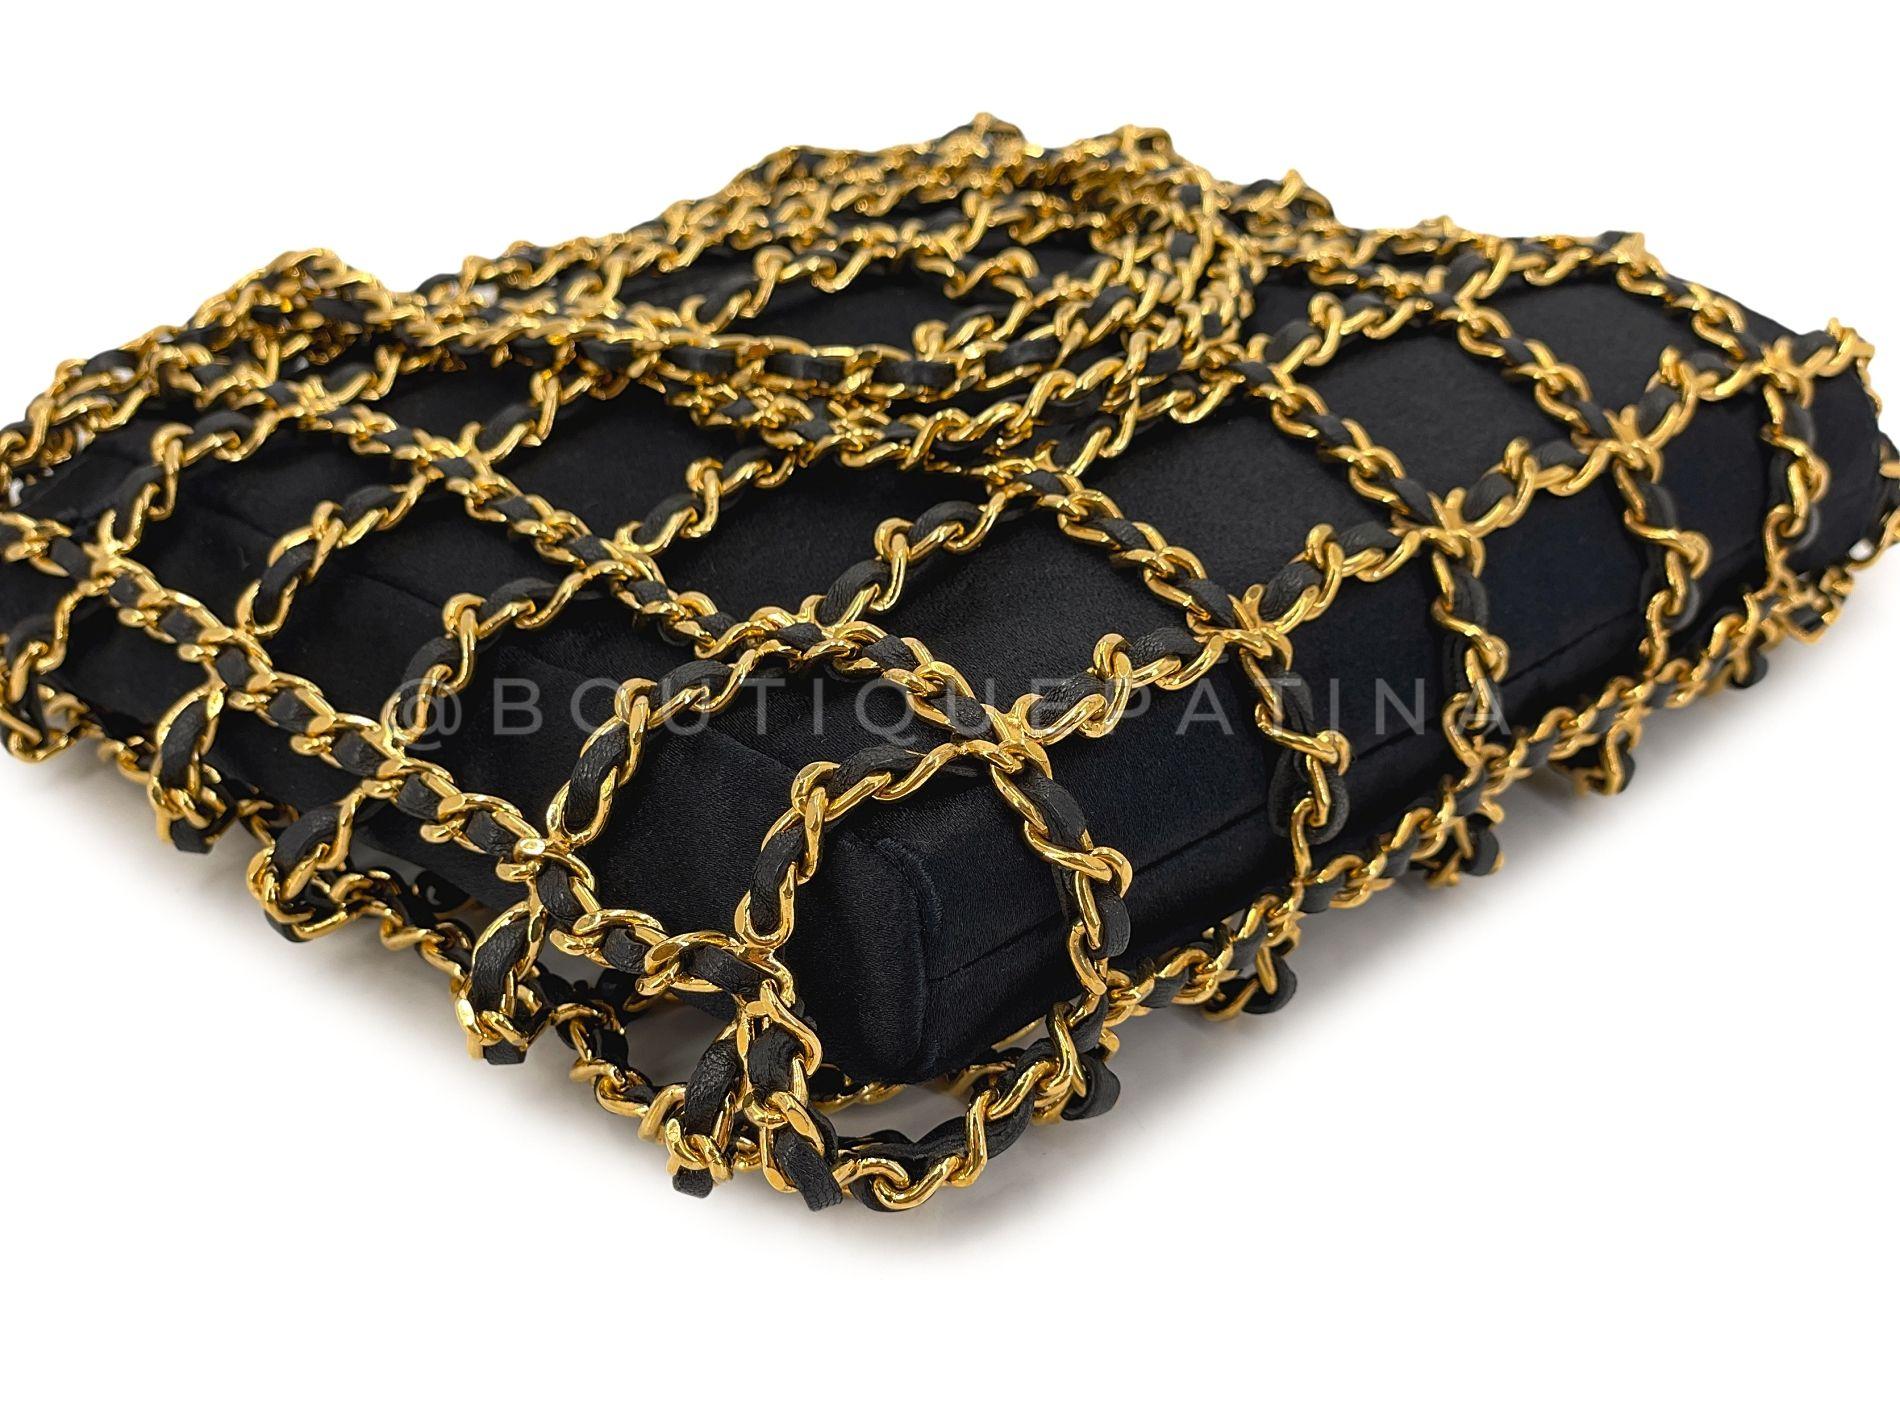 Rare Chanel 1994 Miniature Caged Silk Evening Bag 24k GHW 68049 For Sale 2